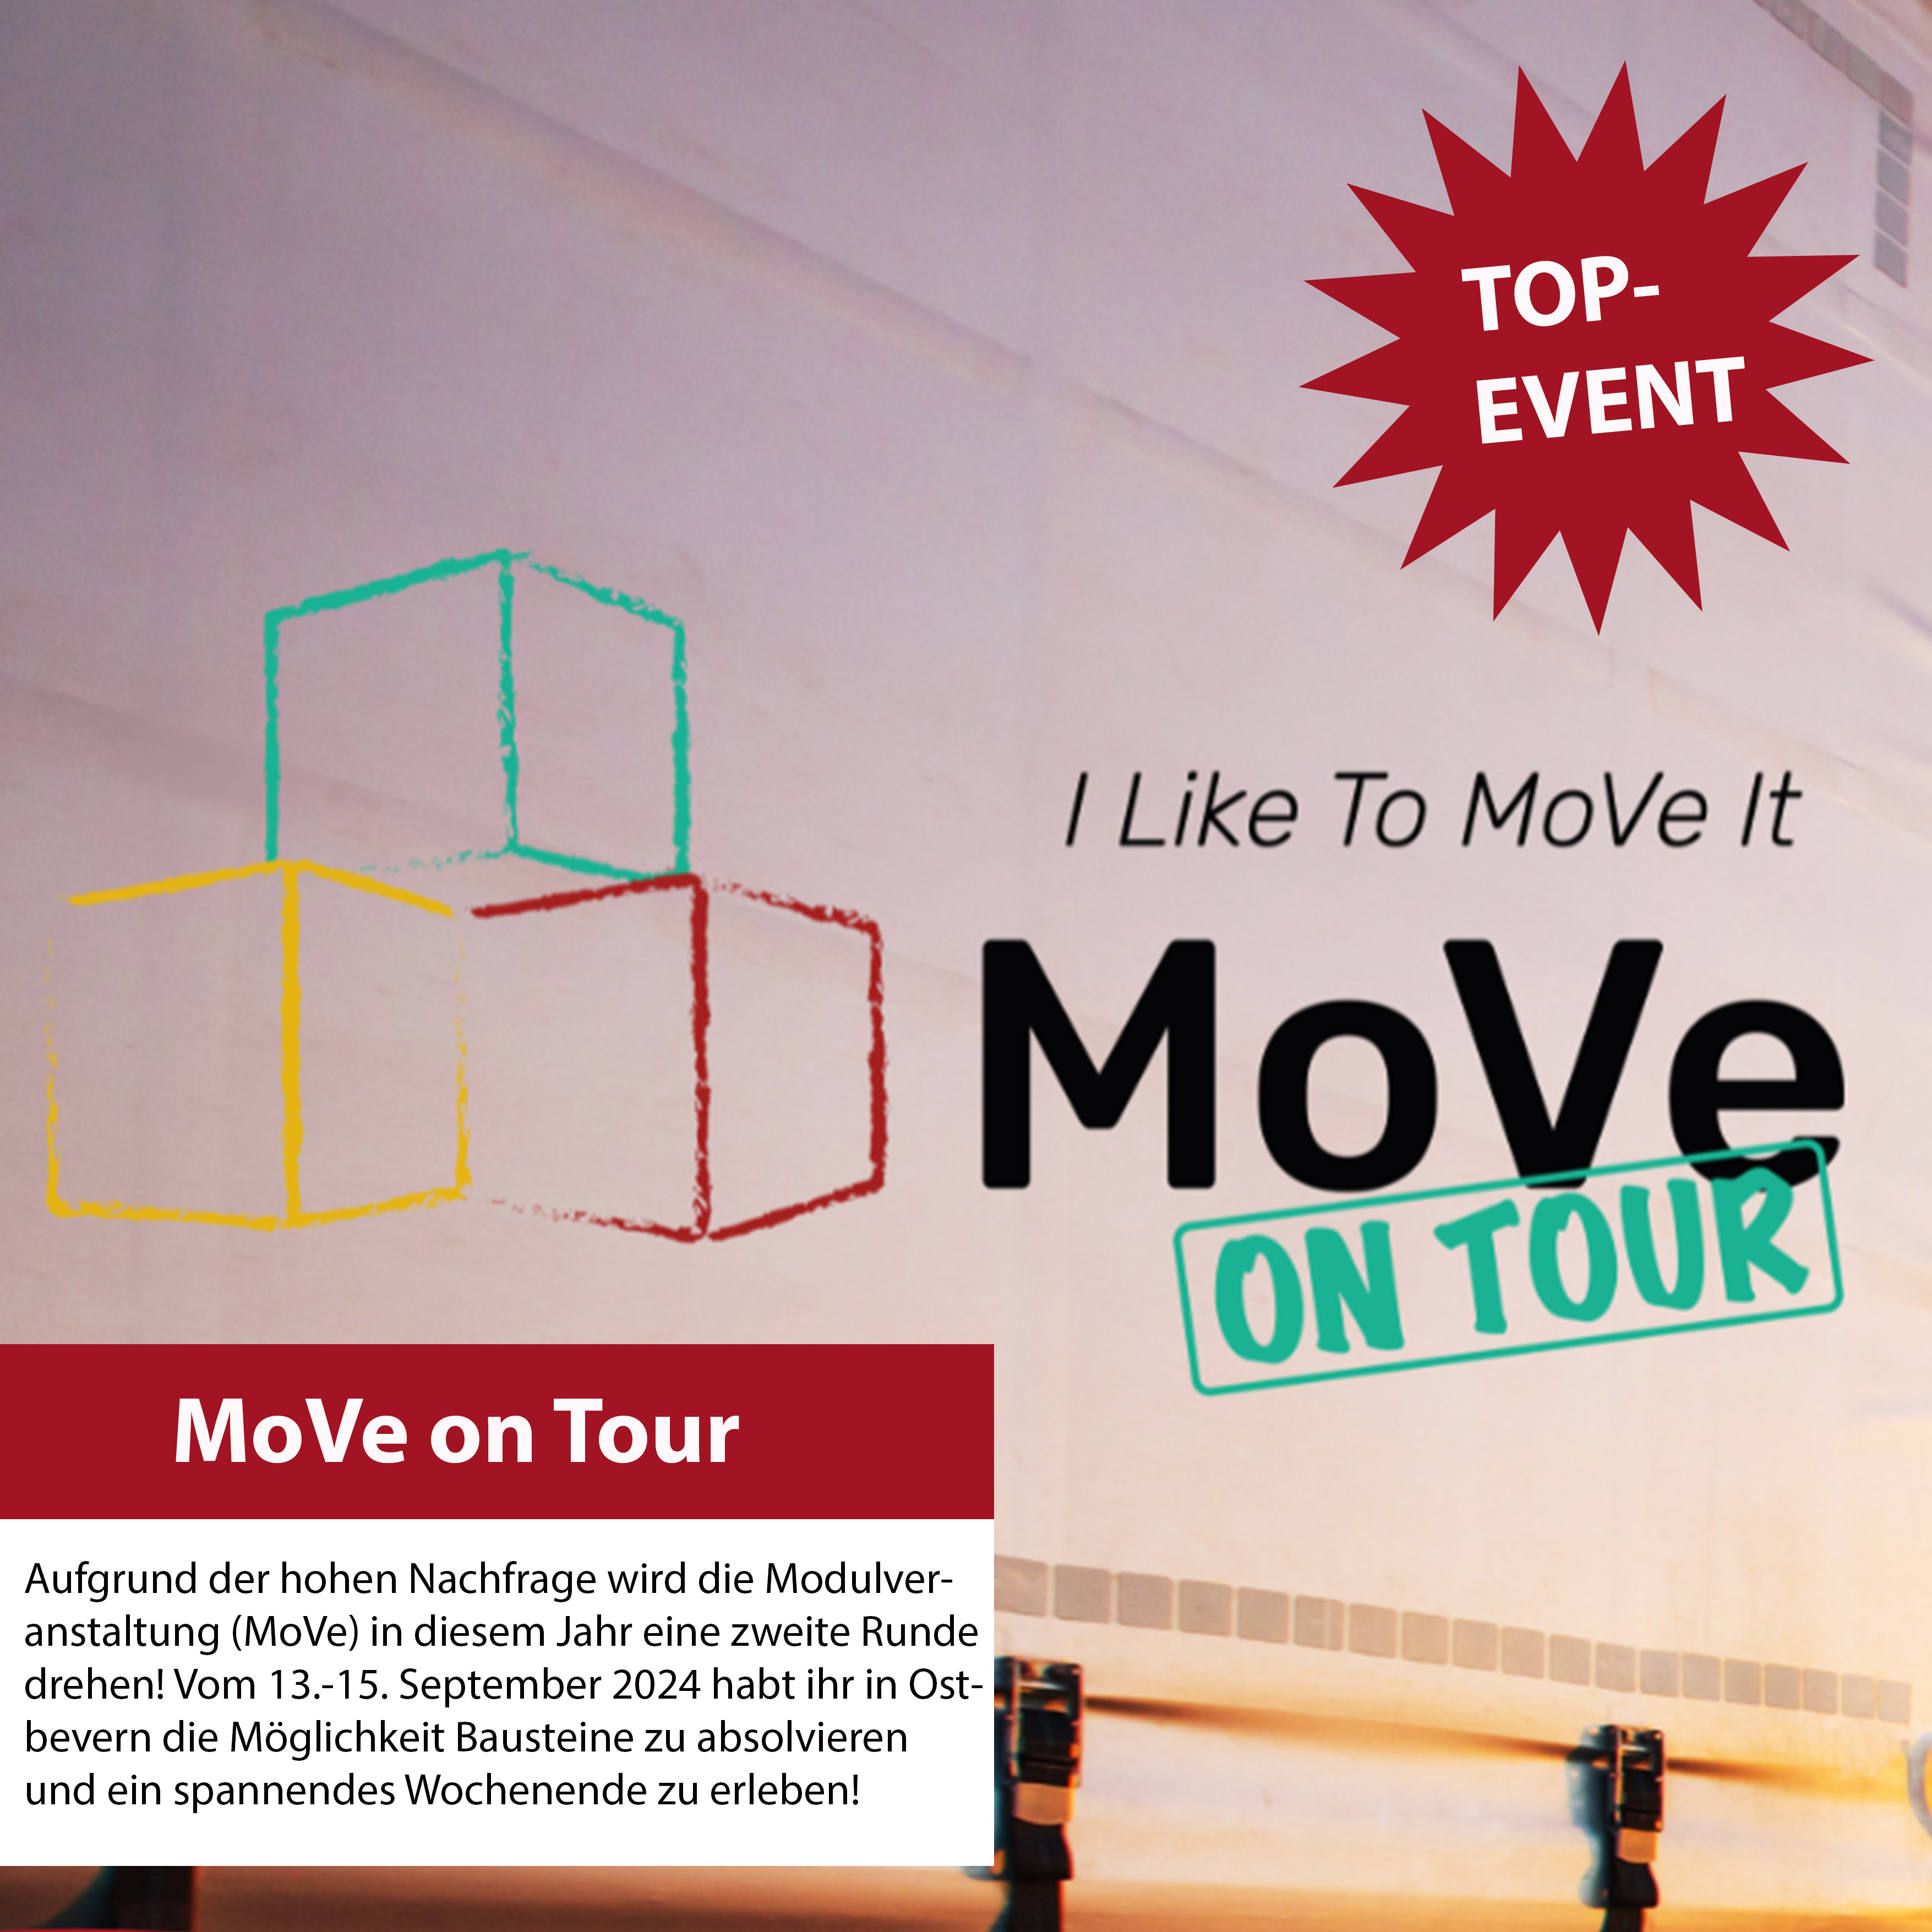 Top-Event_move_on_tour_24.jpg